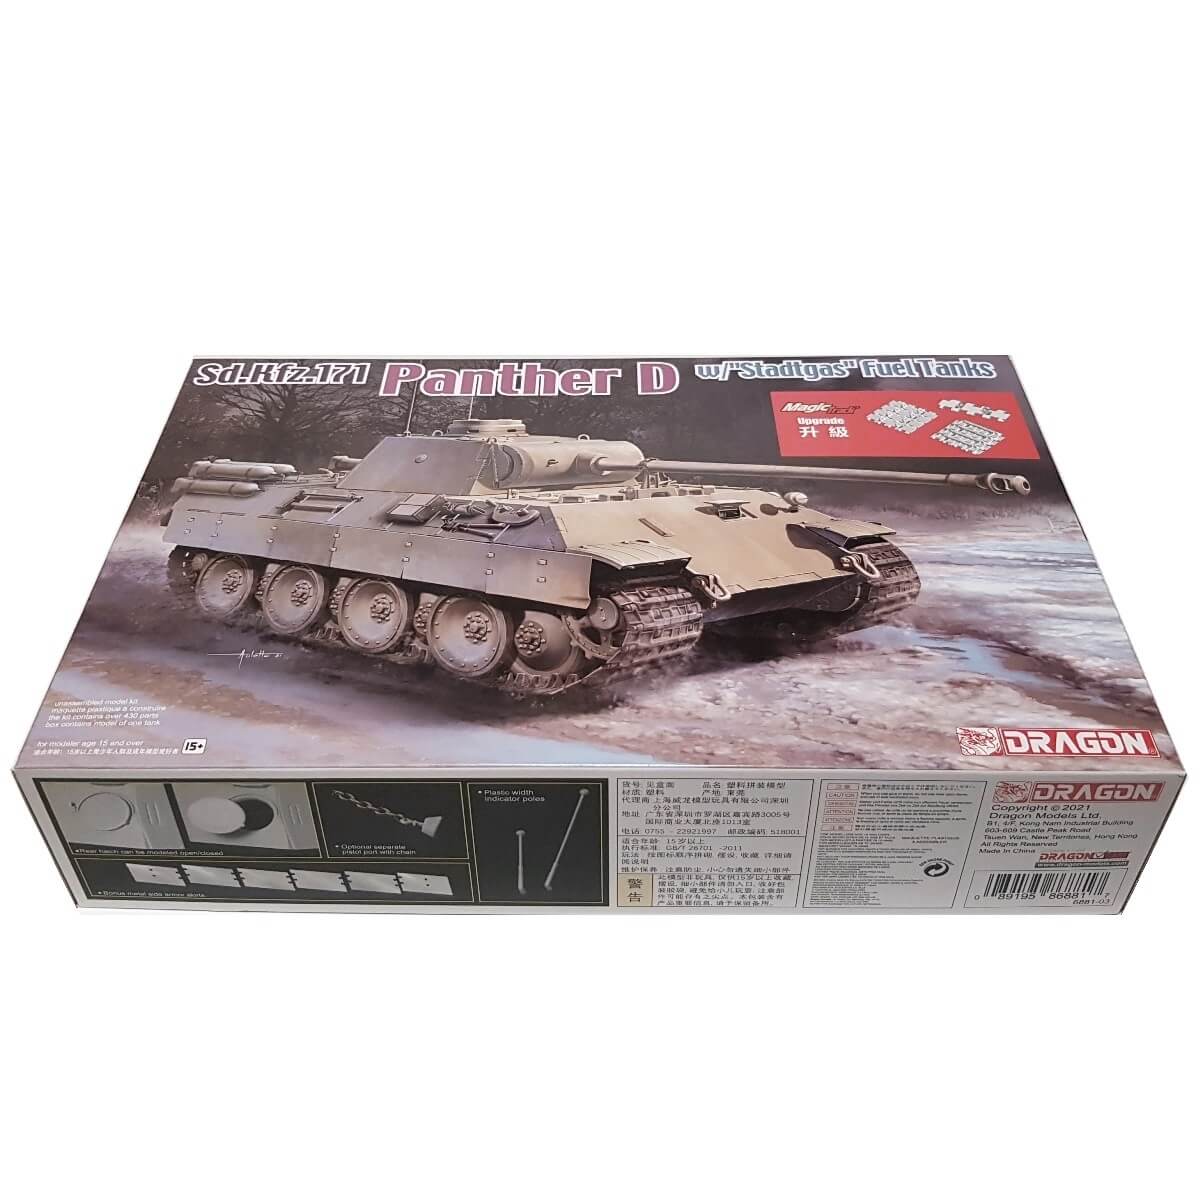 1:35 Sd.Kfz. 171 Panther D with Stadtgas Fuel Tanks - DRAGON